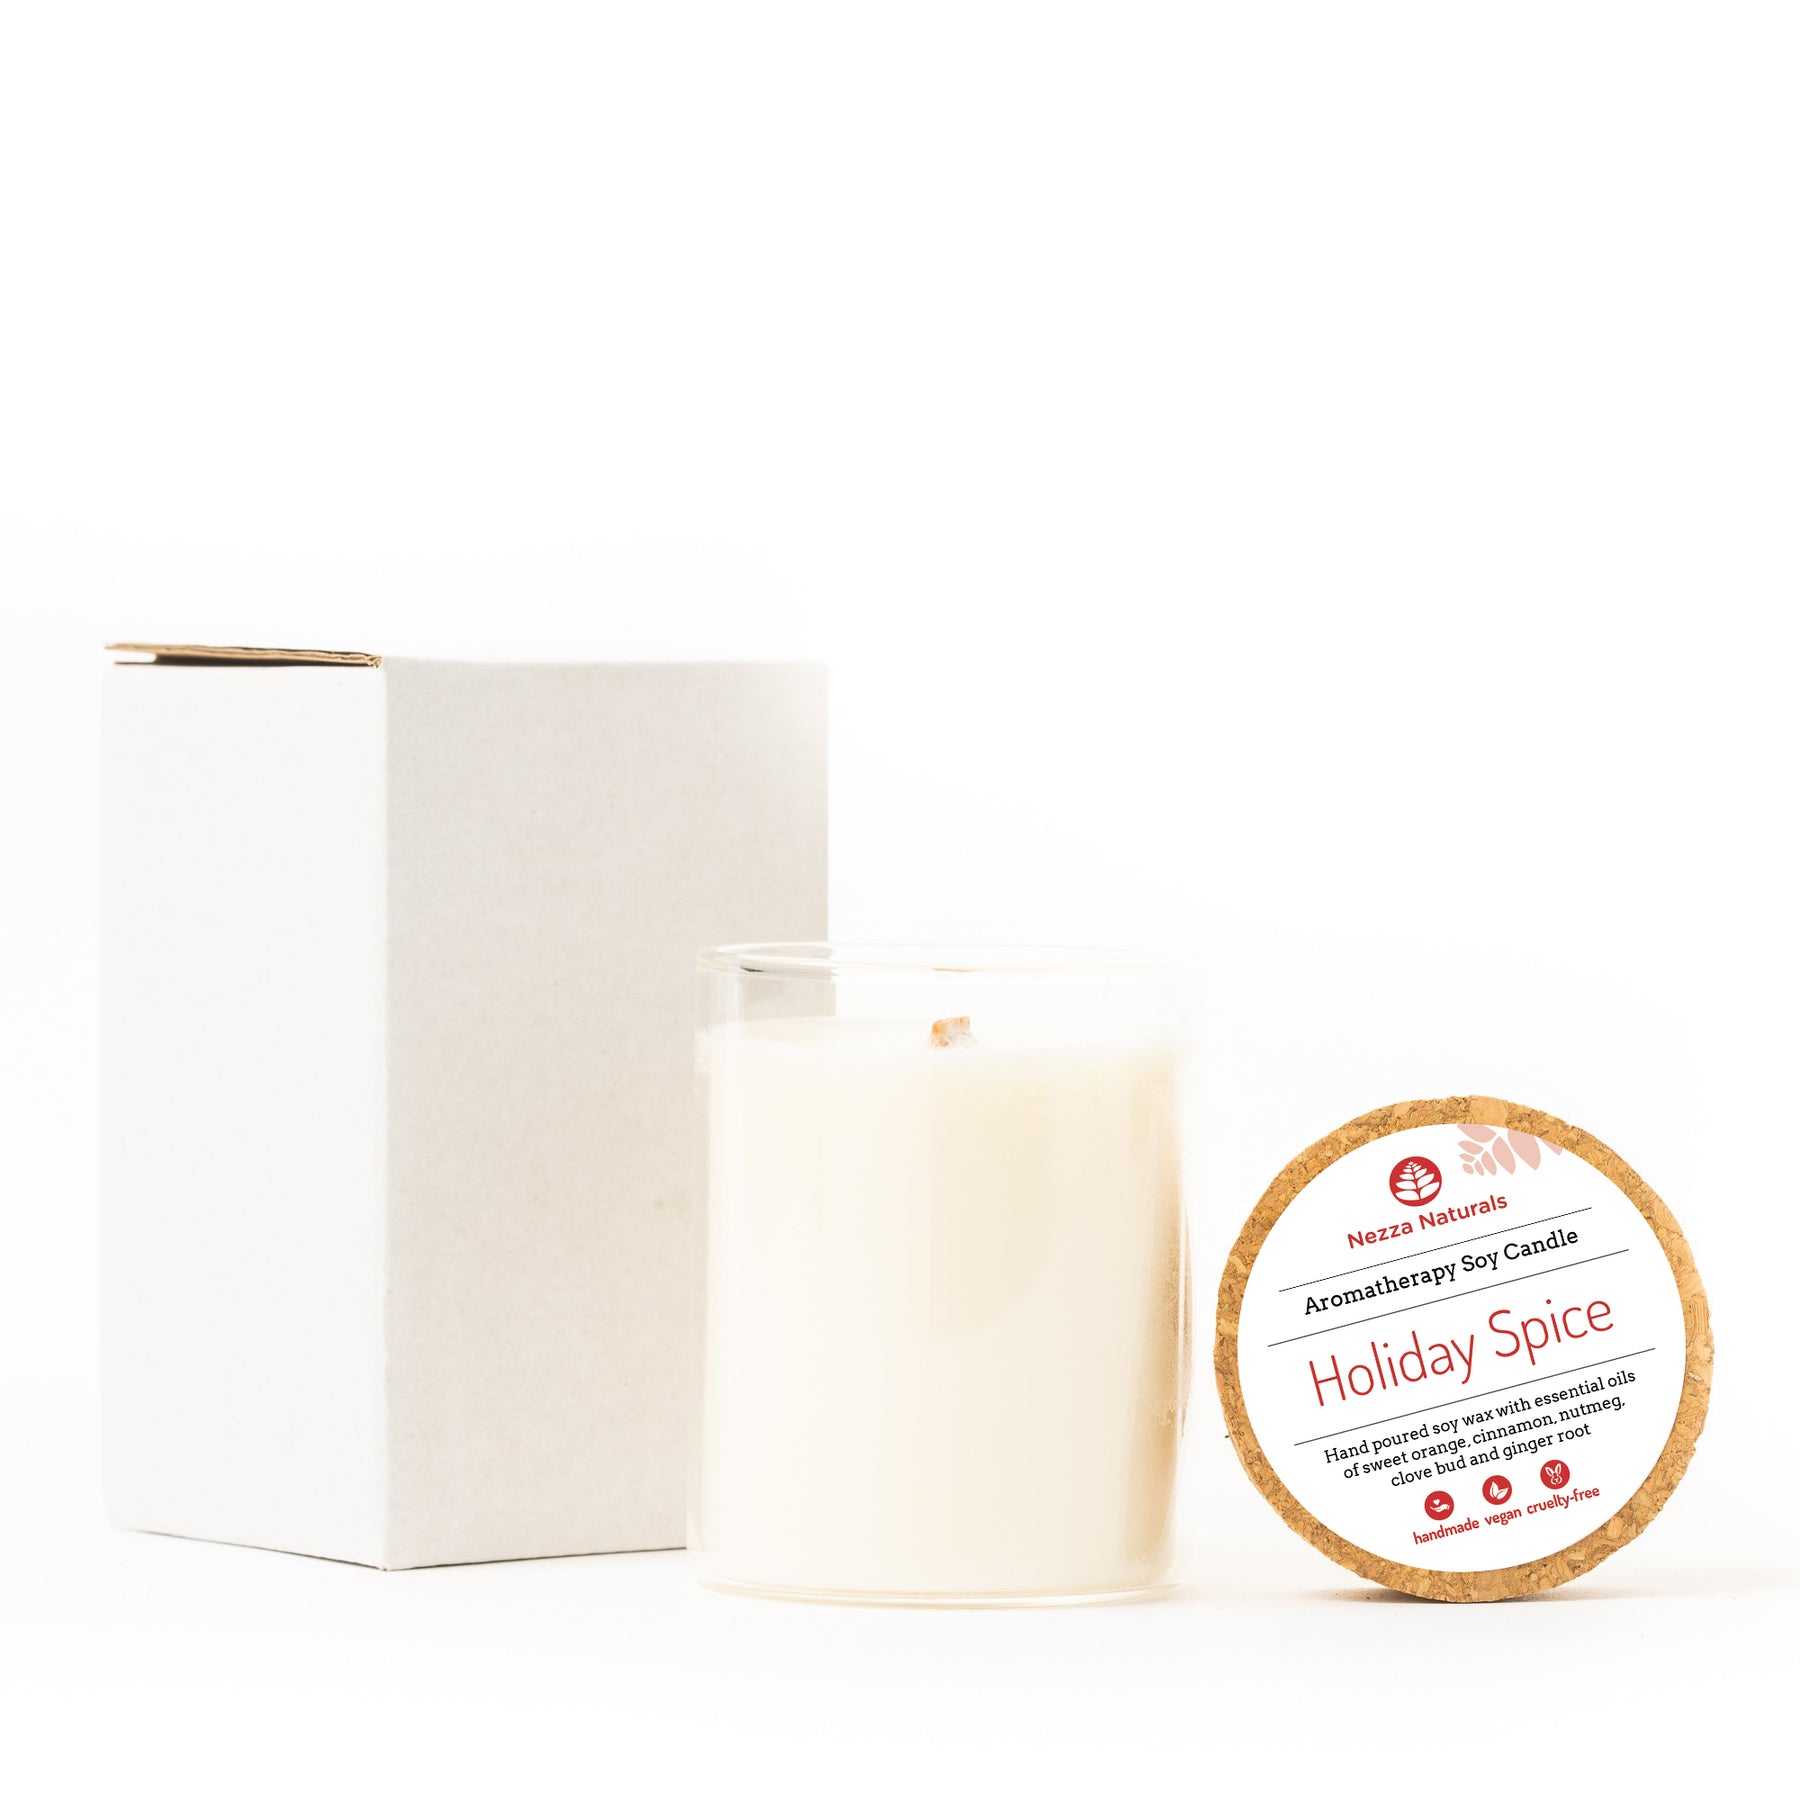 Aromatherapy Soy Candle in Lemongrass